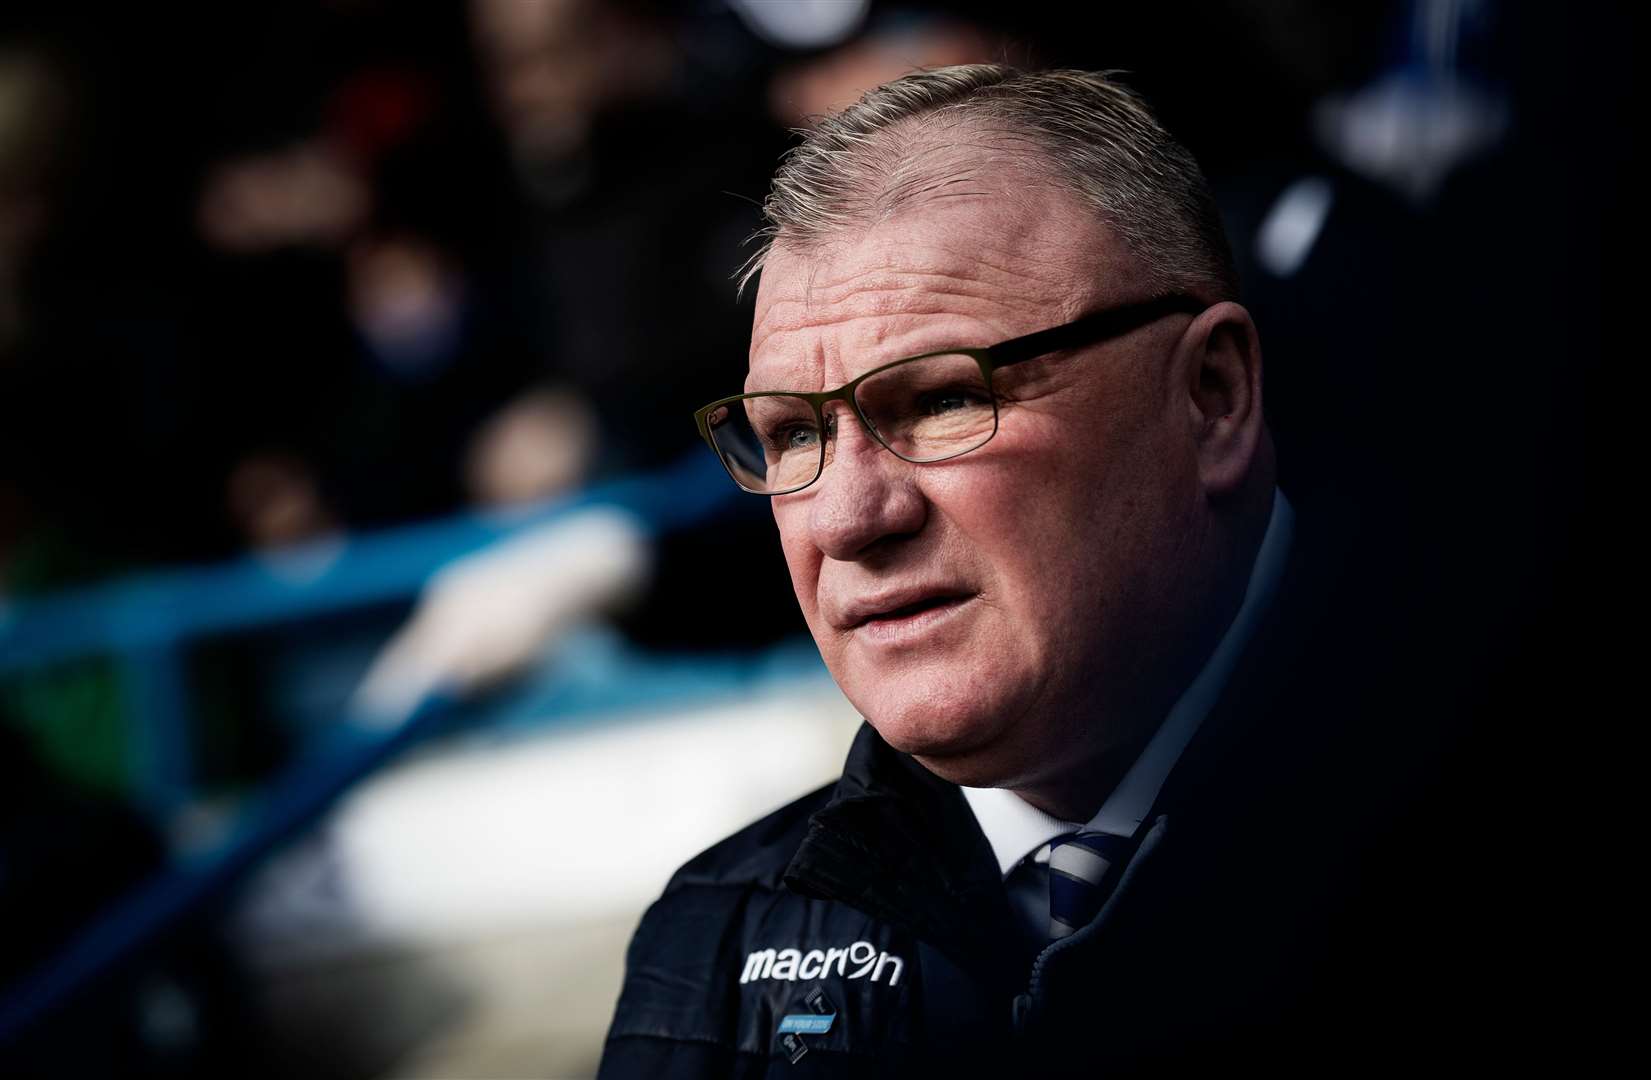 Gillingham manager Steve Evans speaks out after fellow League 1 manager is admitted to hospital with Covid-19